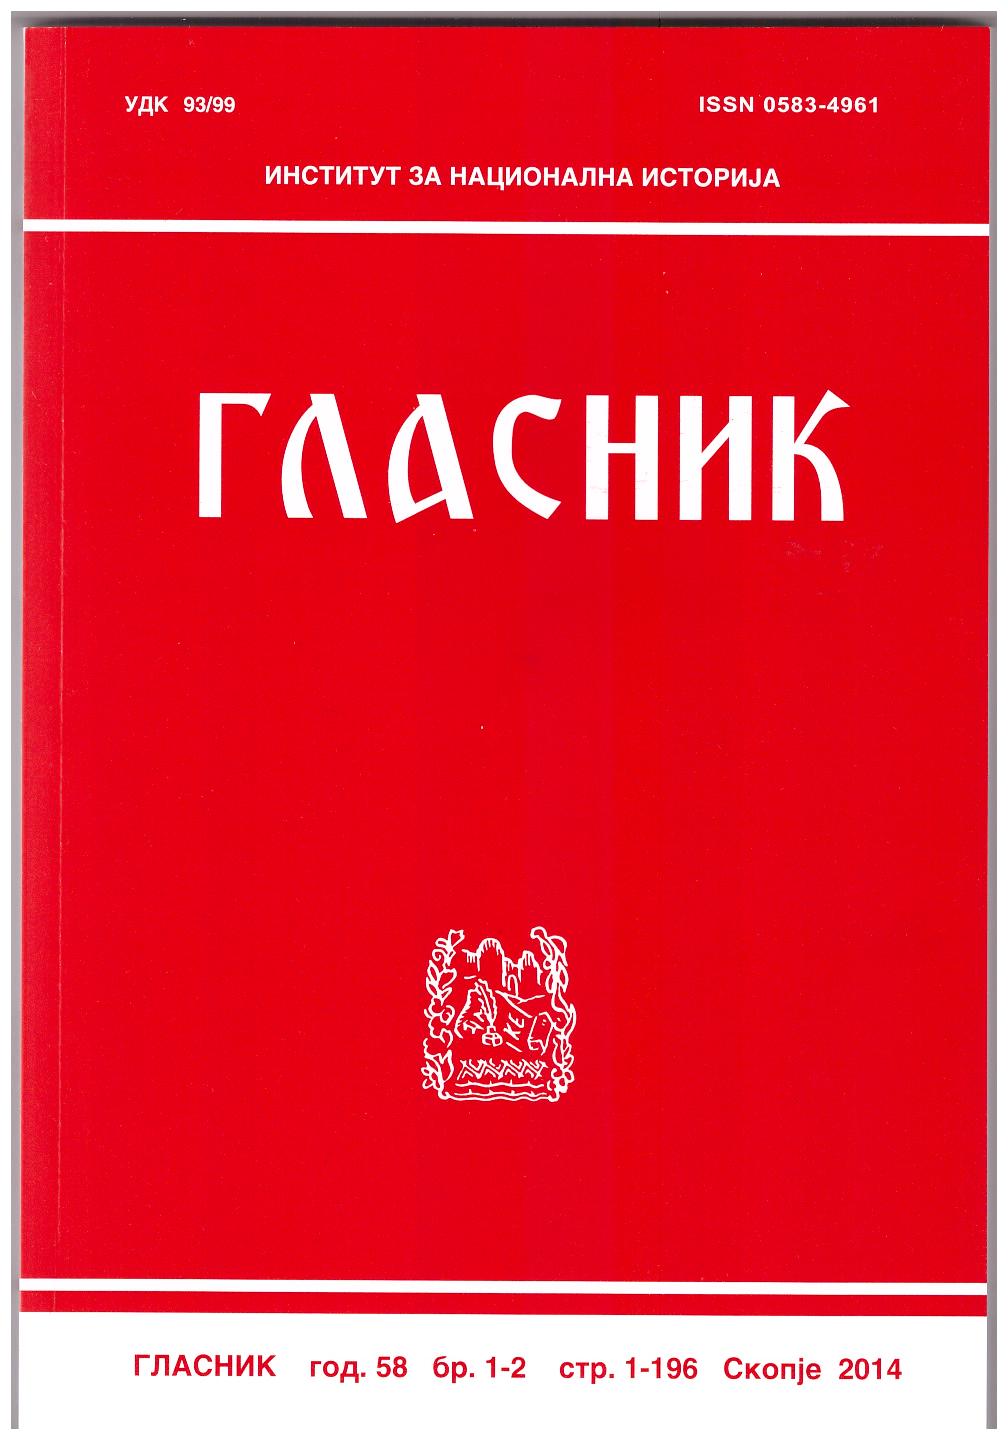 BORCHE ILIEVSKI, MACEDONIAN-SERBIAN CHURCH RELATIONS 1944 - 1970 Skopje: Faculty of Philosophy, Institute of History, 2010, 236. Cover Image